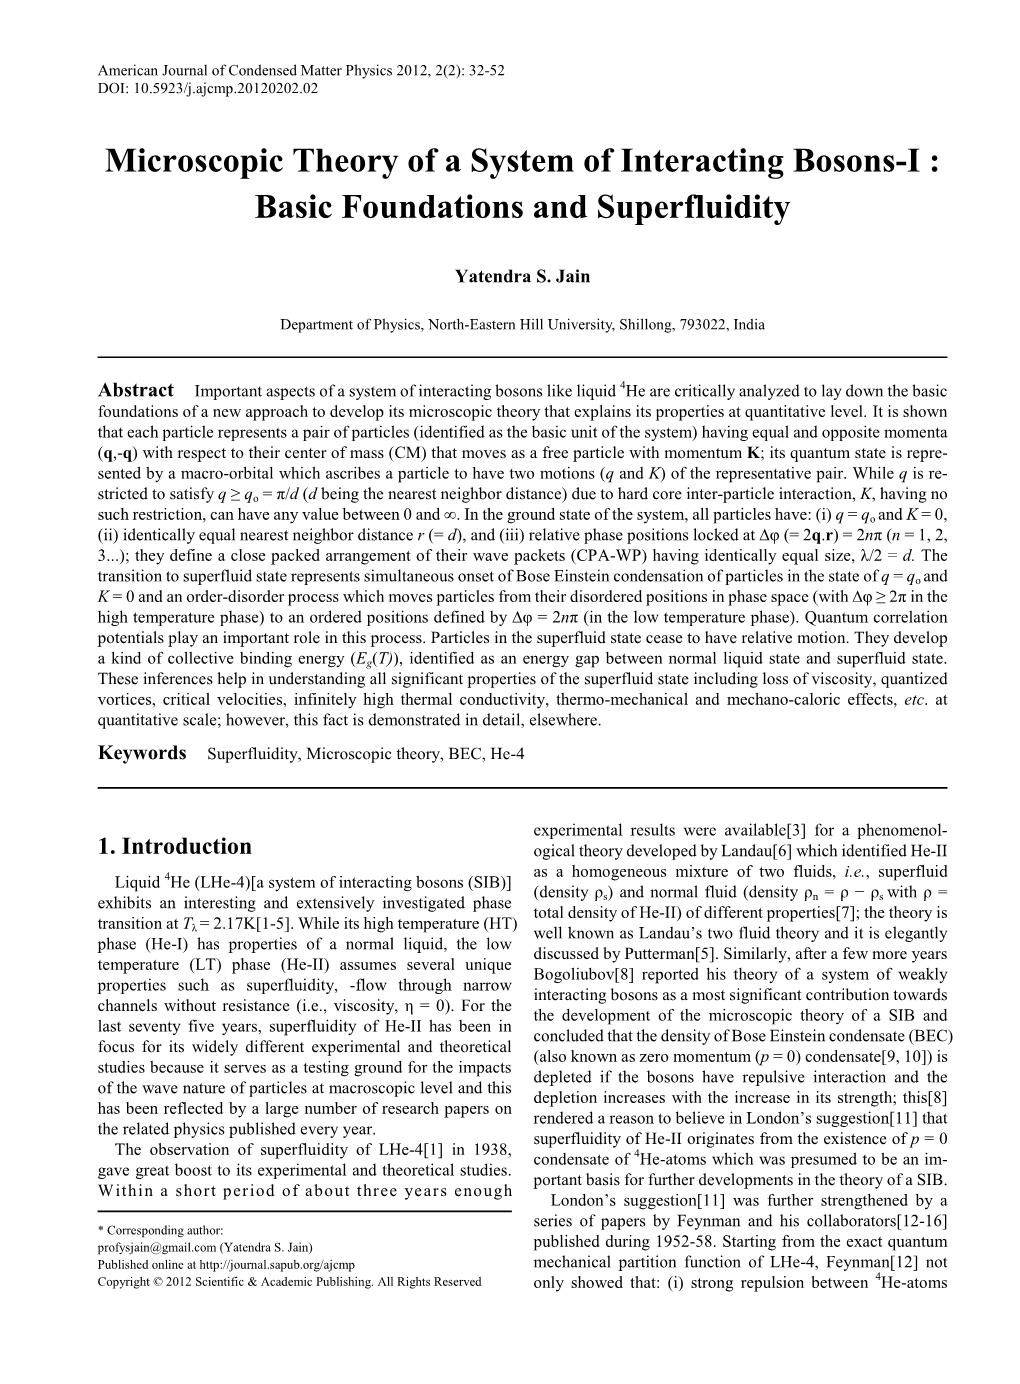 Microscopic Theory of a System of Interacting Bosons-I : Basic Foundations and Superfluidity